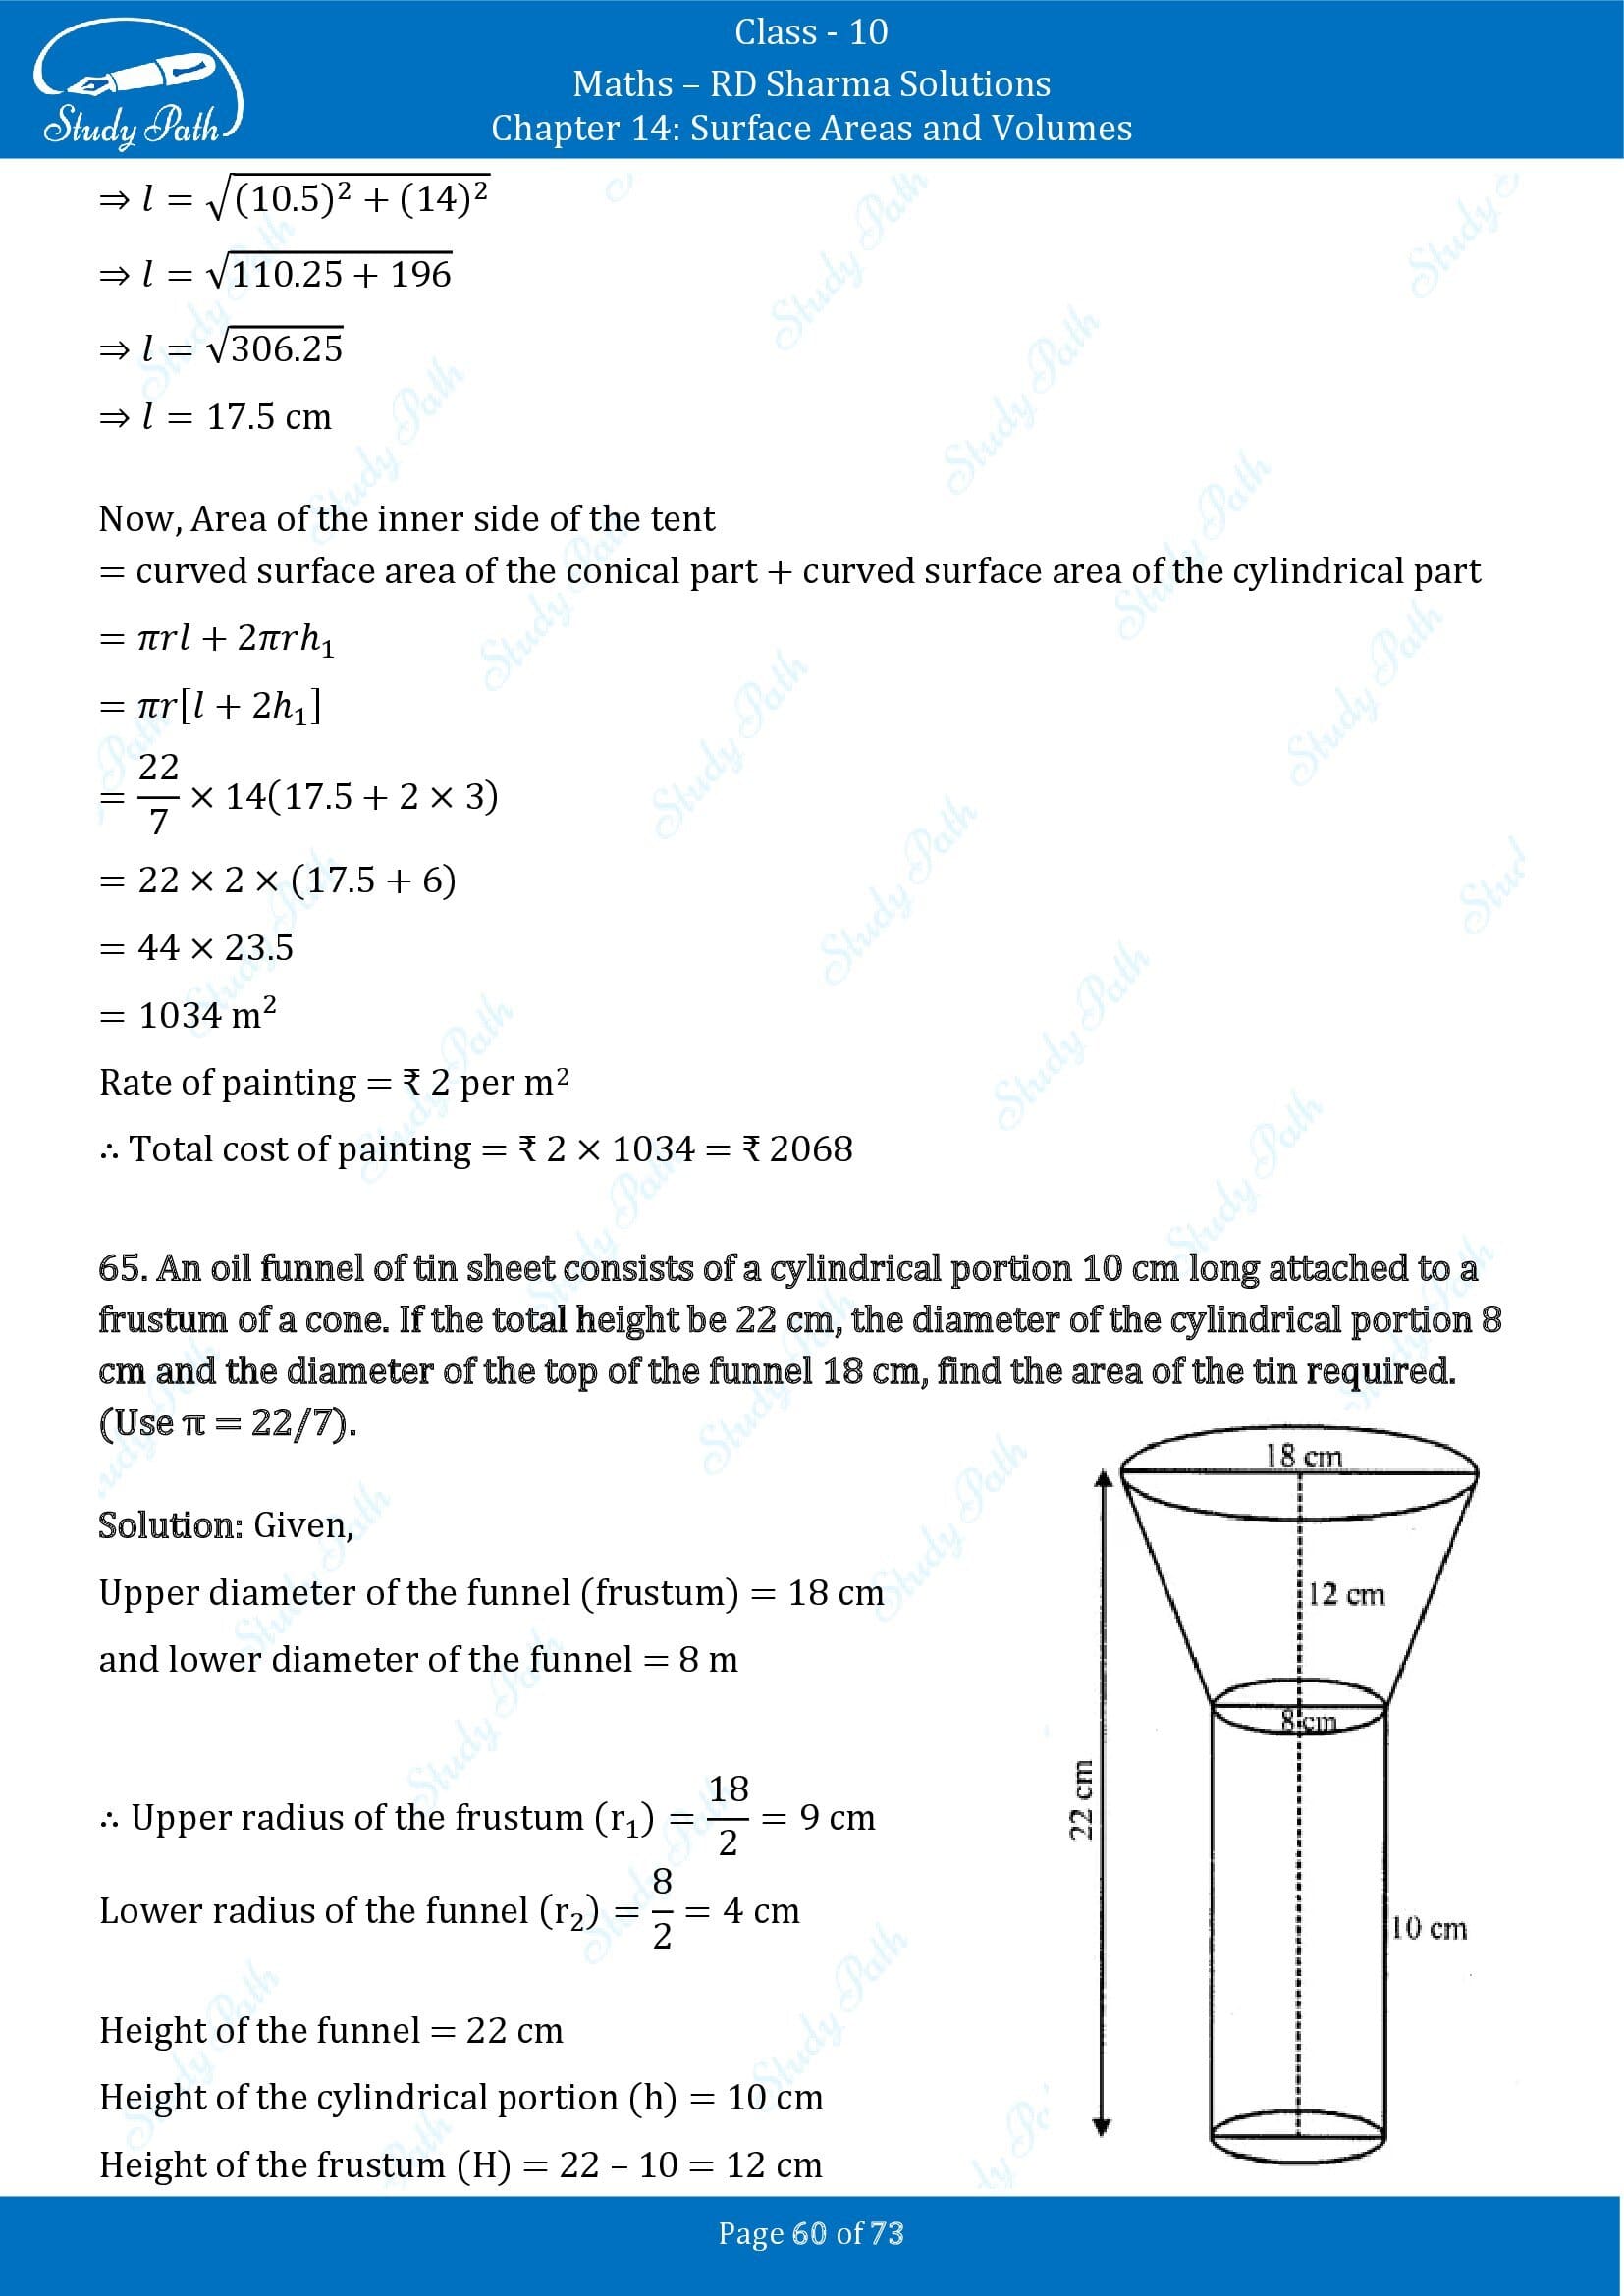 RD Sharma Solutions Class 10 Chapter 14 Surface Areas and Volumes Revision